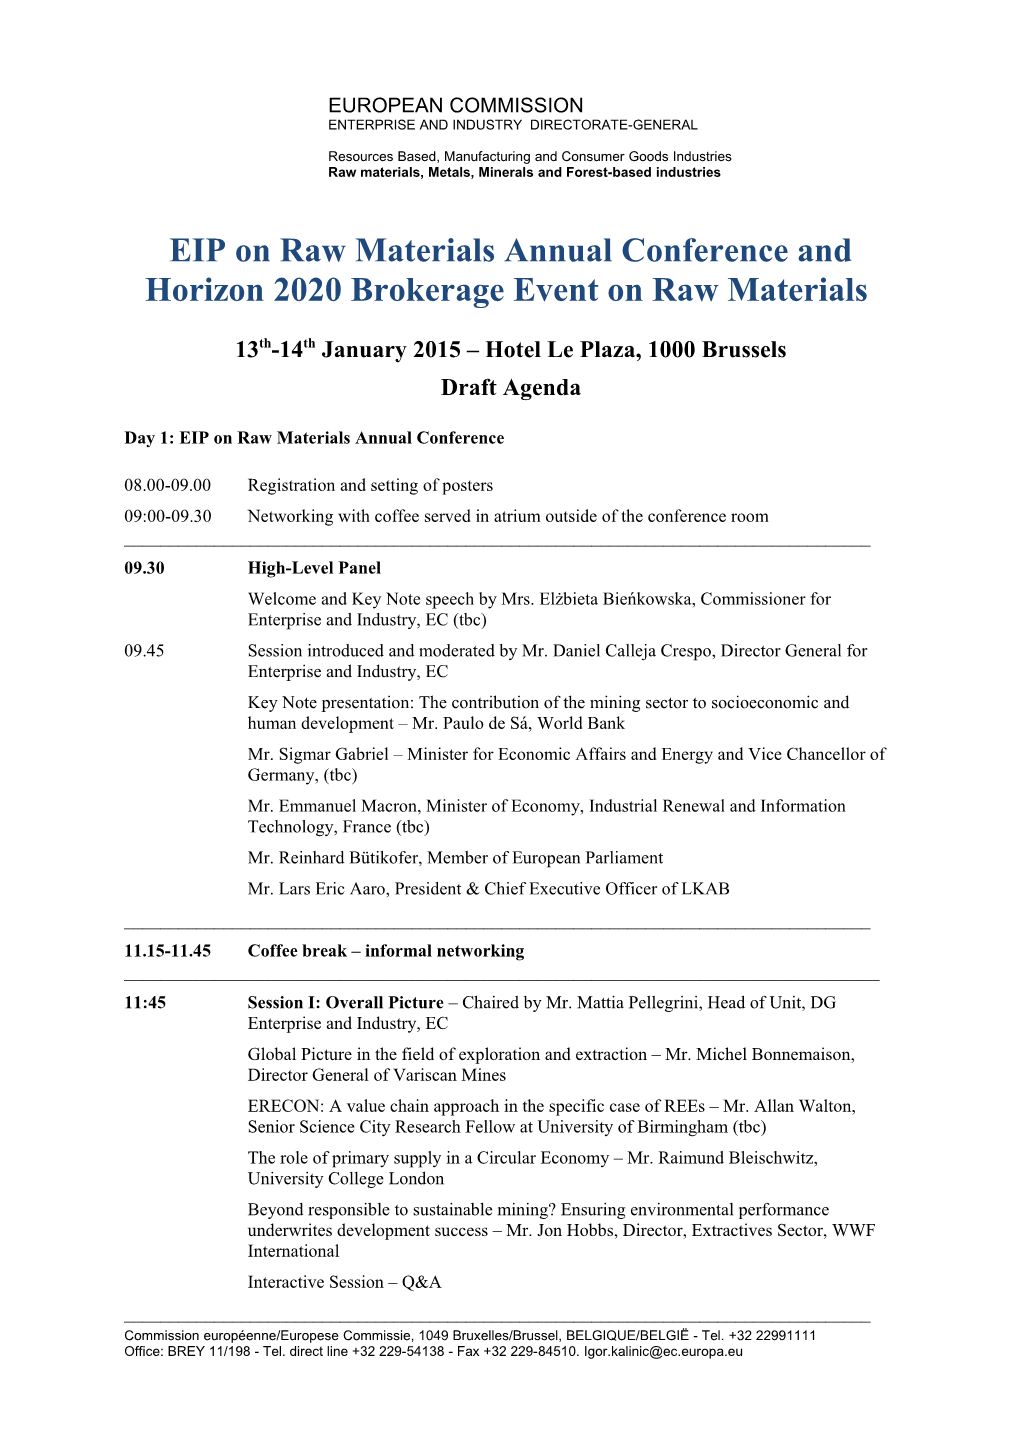 EIP on Raw Materials Annual Conference and Horizon 2020 Brokerage Event on Raw Materials